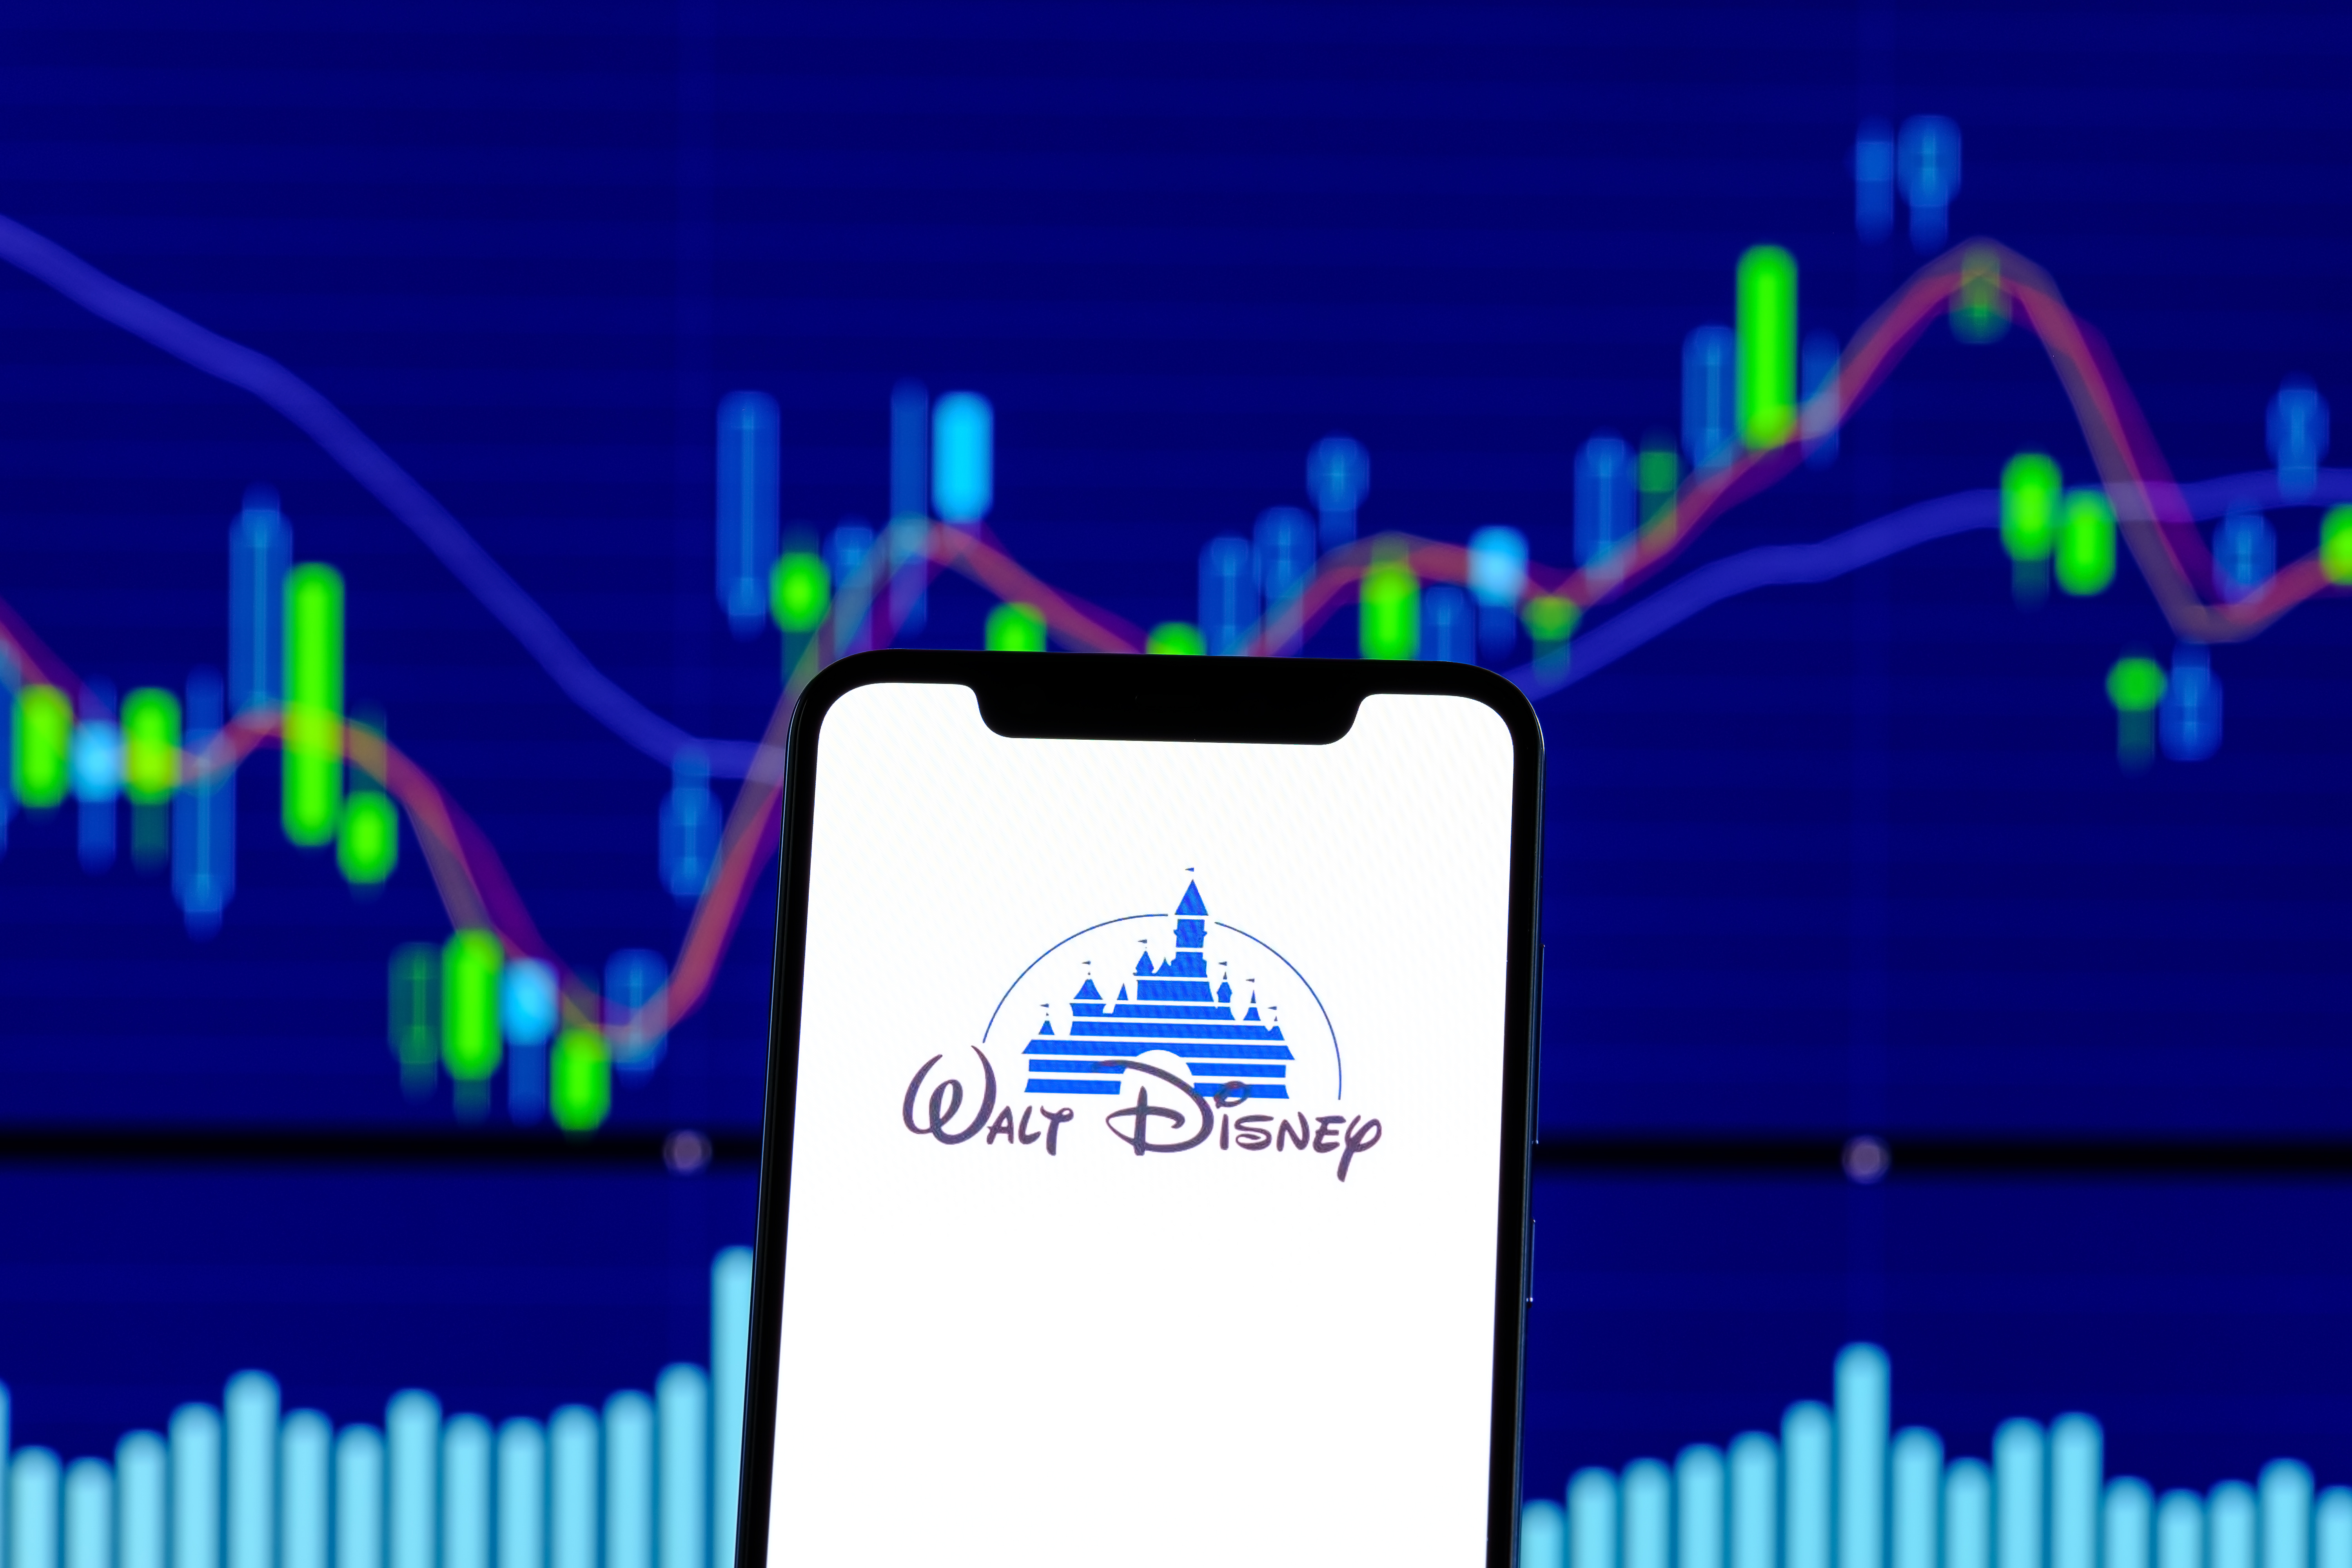 Disney Rallies, Twitter Faces Debt, FTX, and More